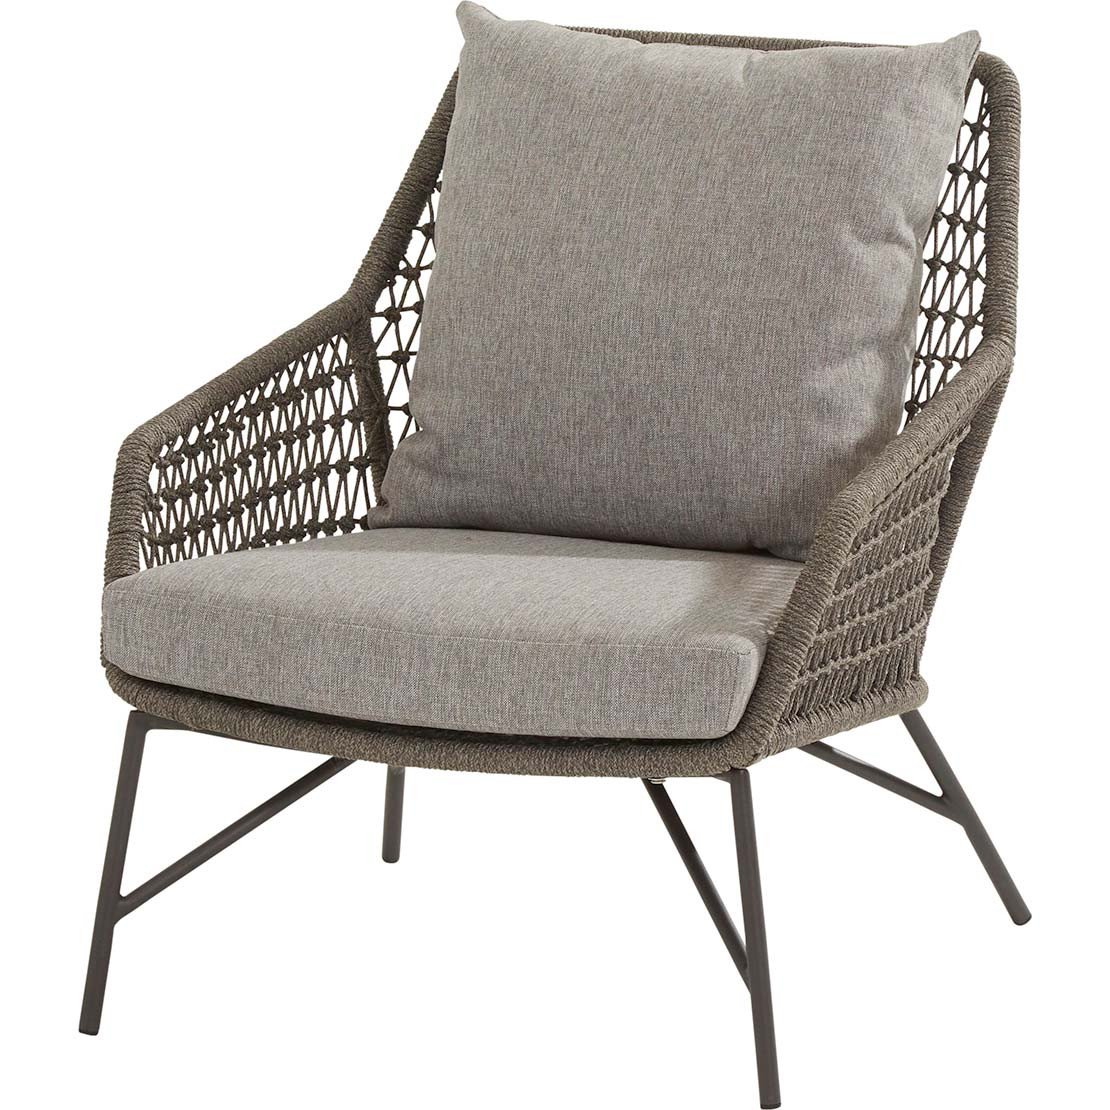 Babilonia living chair mid grey knotted with 2 cushions